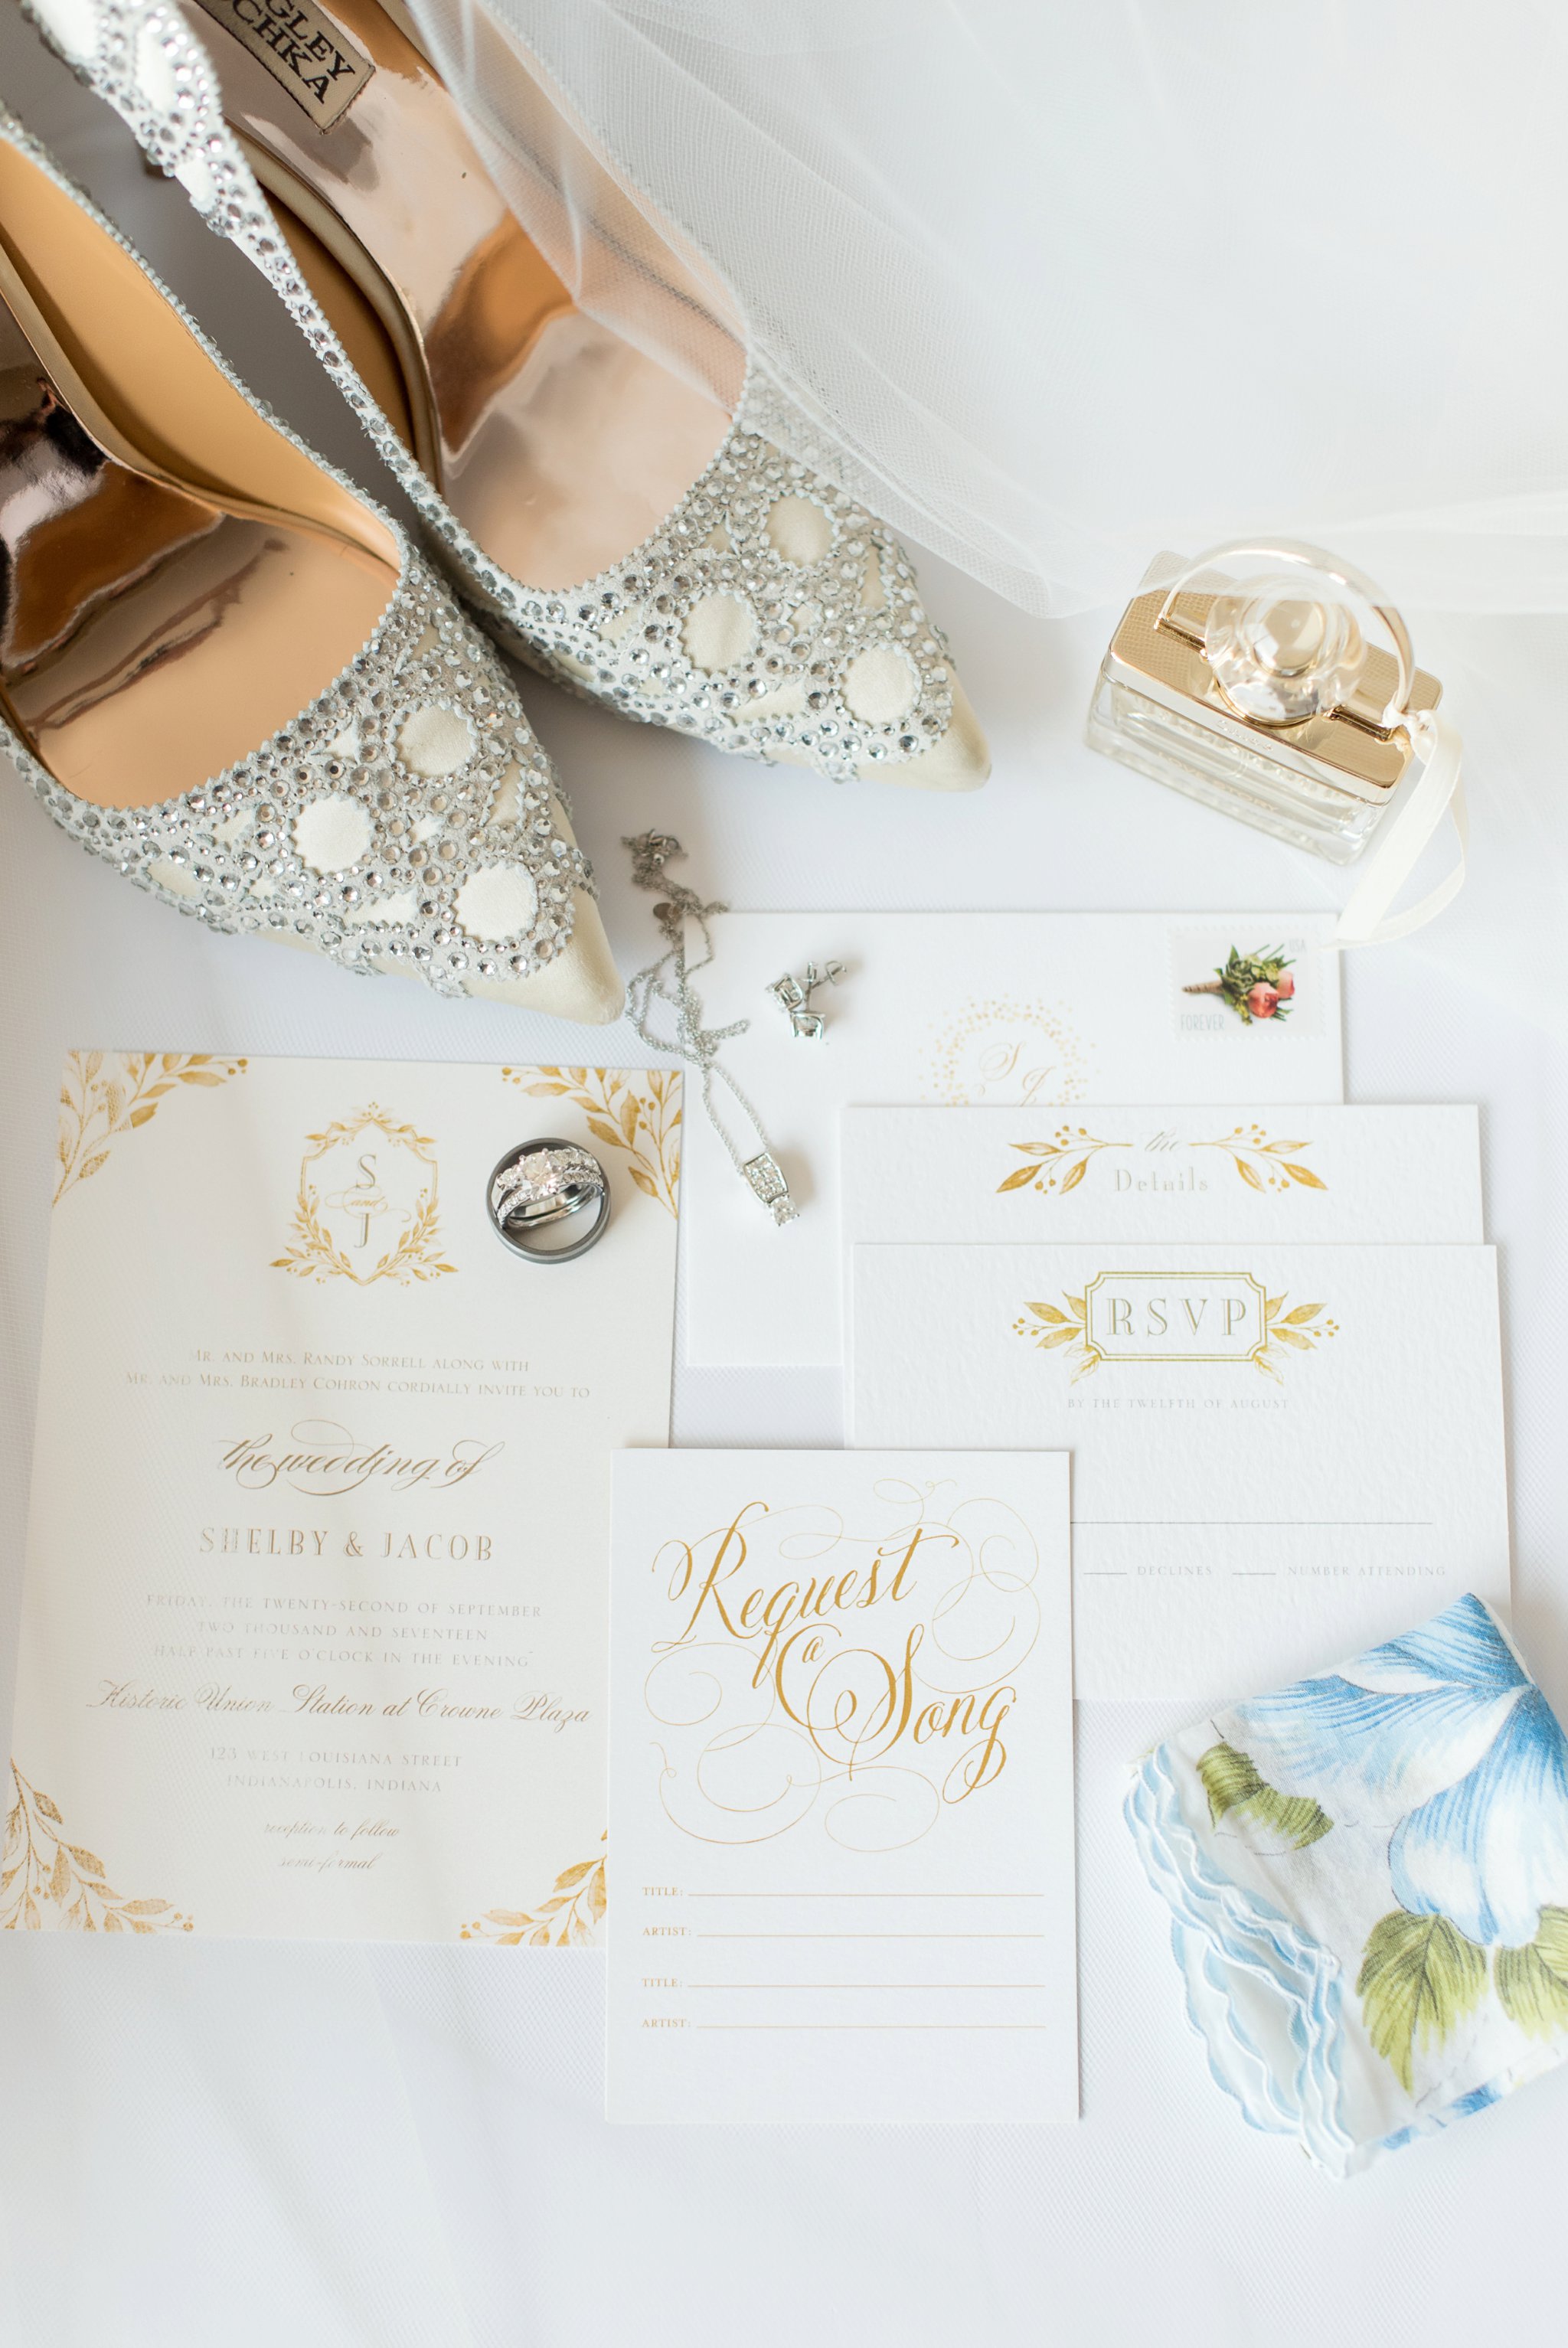 Union Station Wedding | Indianapolis, IN | Gold wedding details 